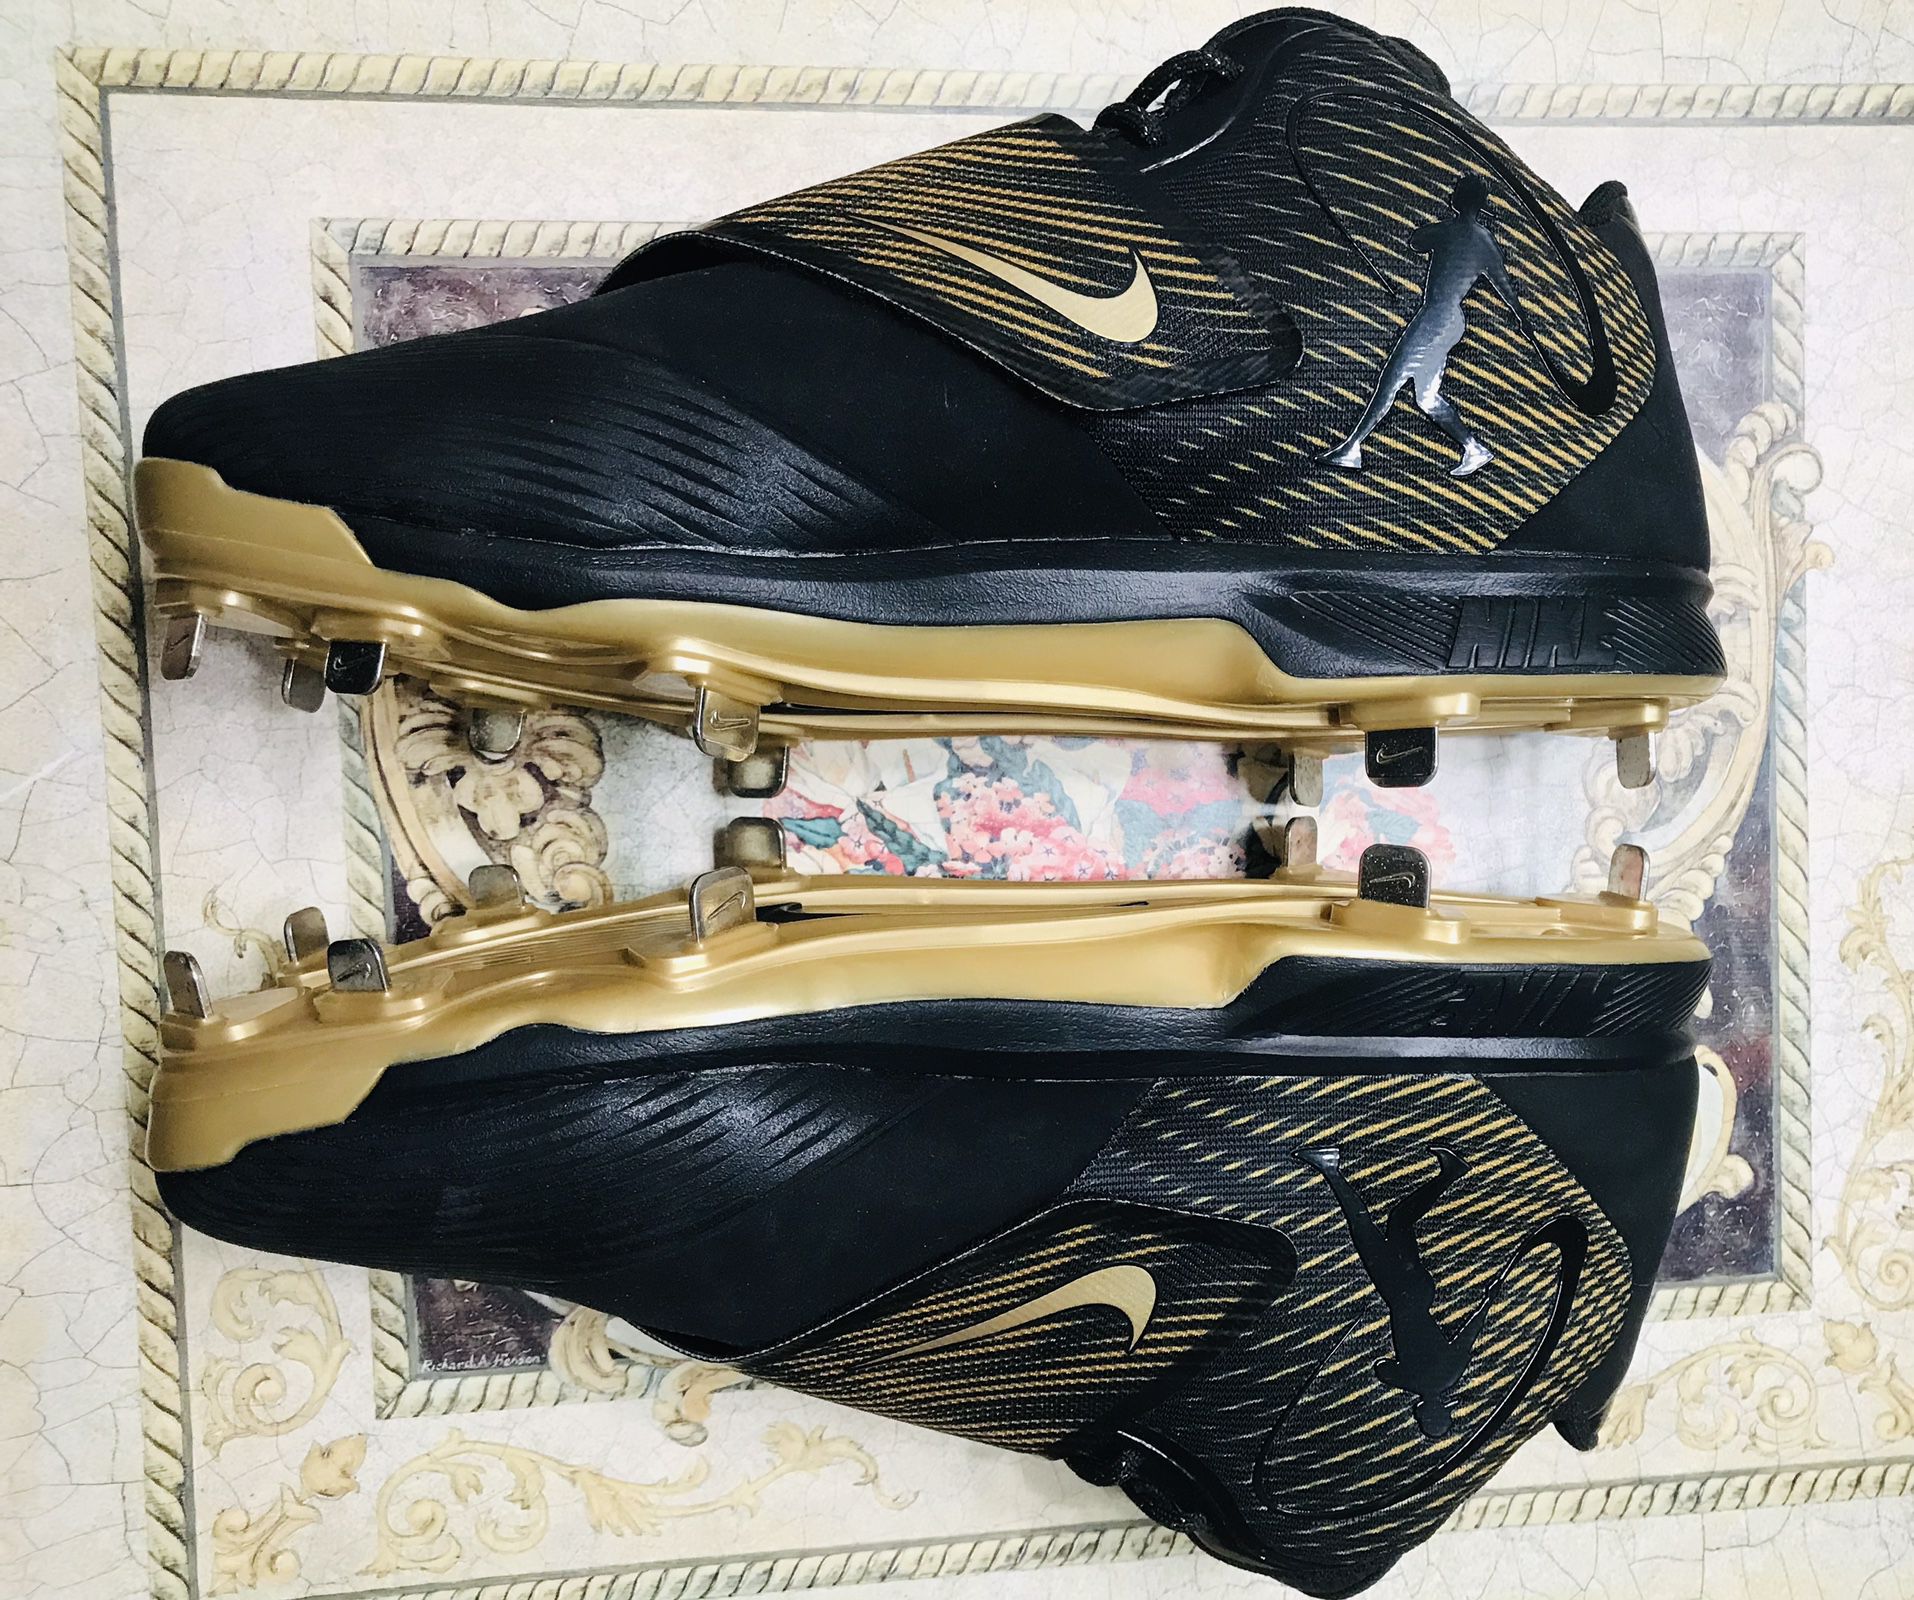 Nike ken Griffey Jr cleats size 12.5 for Sale in North Miami Beach, FL -  OfferUp